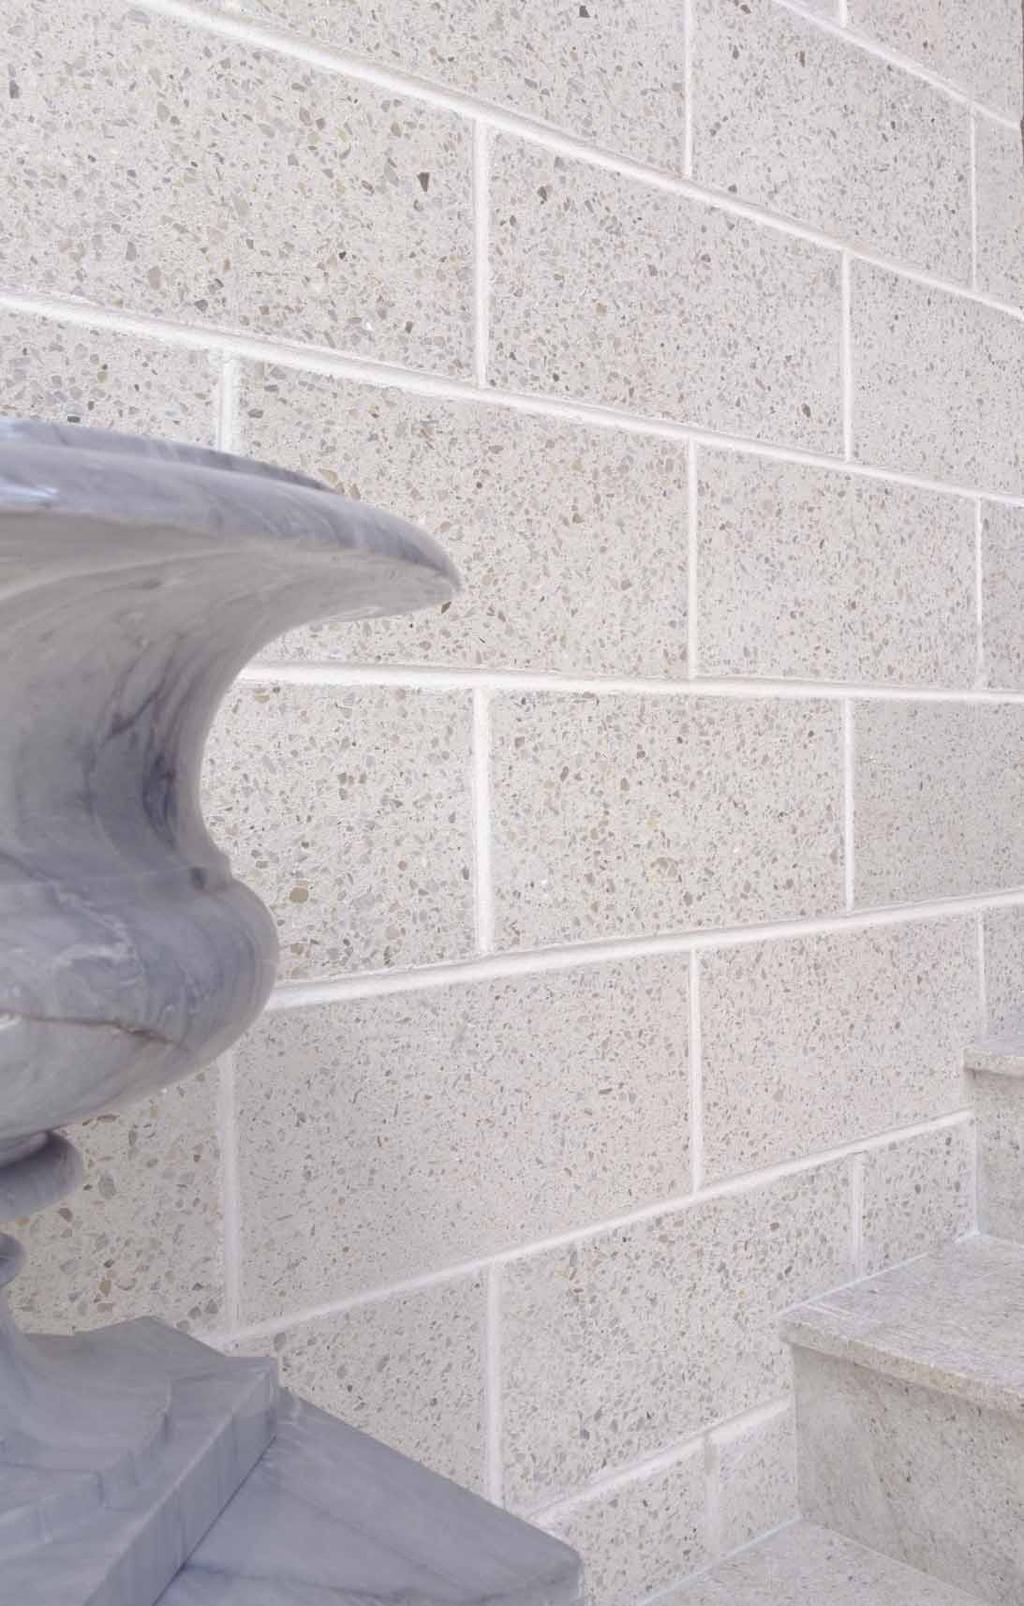 Designer Block South Australia Boral Masonry has been supplying coloured and textured blocks for over 25 years to the Australian architectural community.